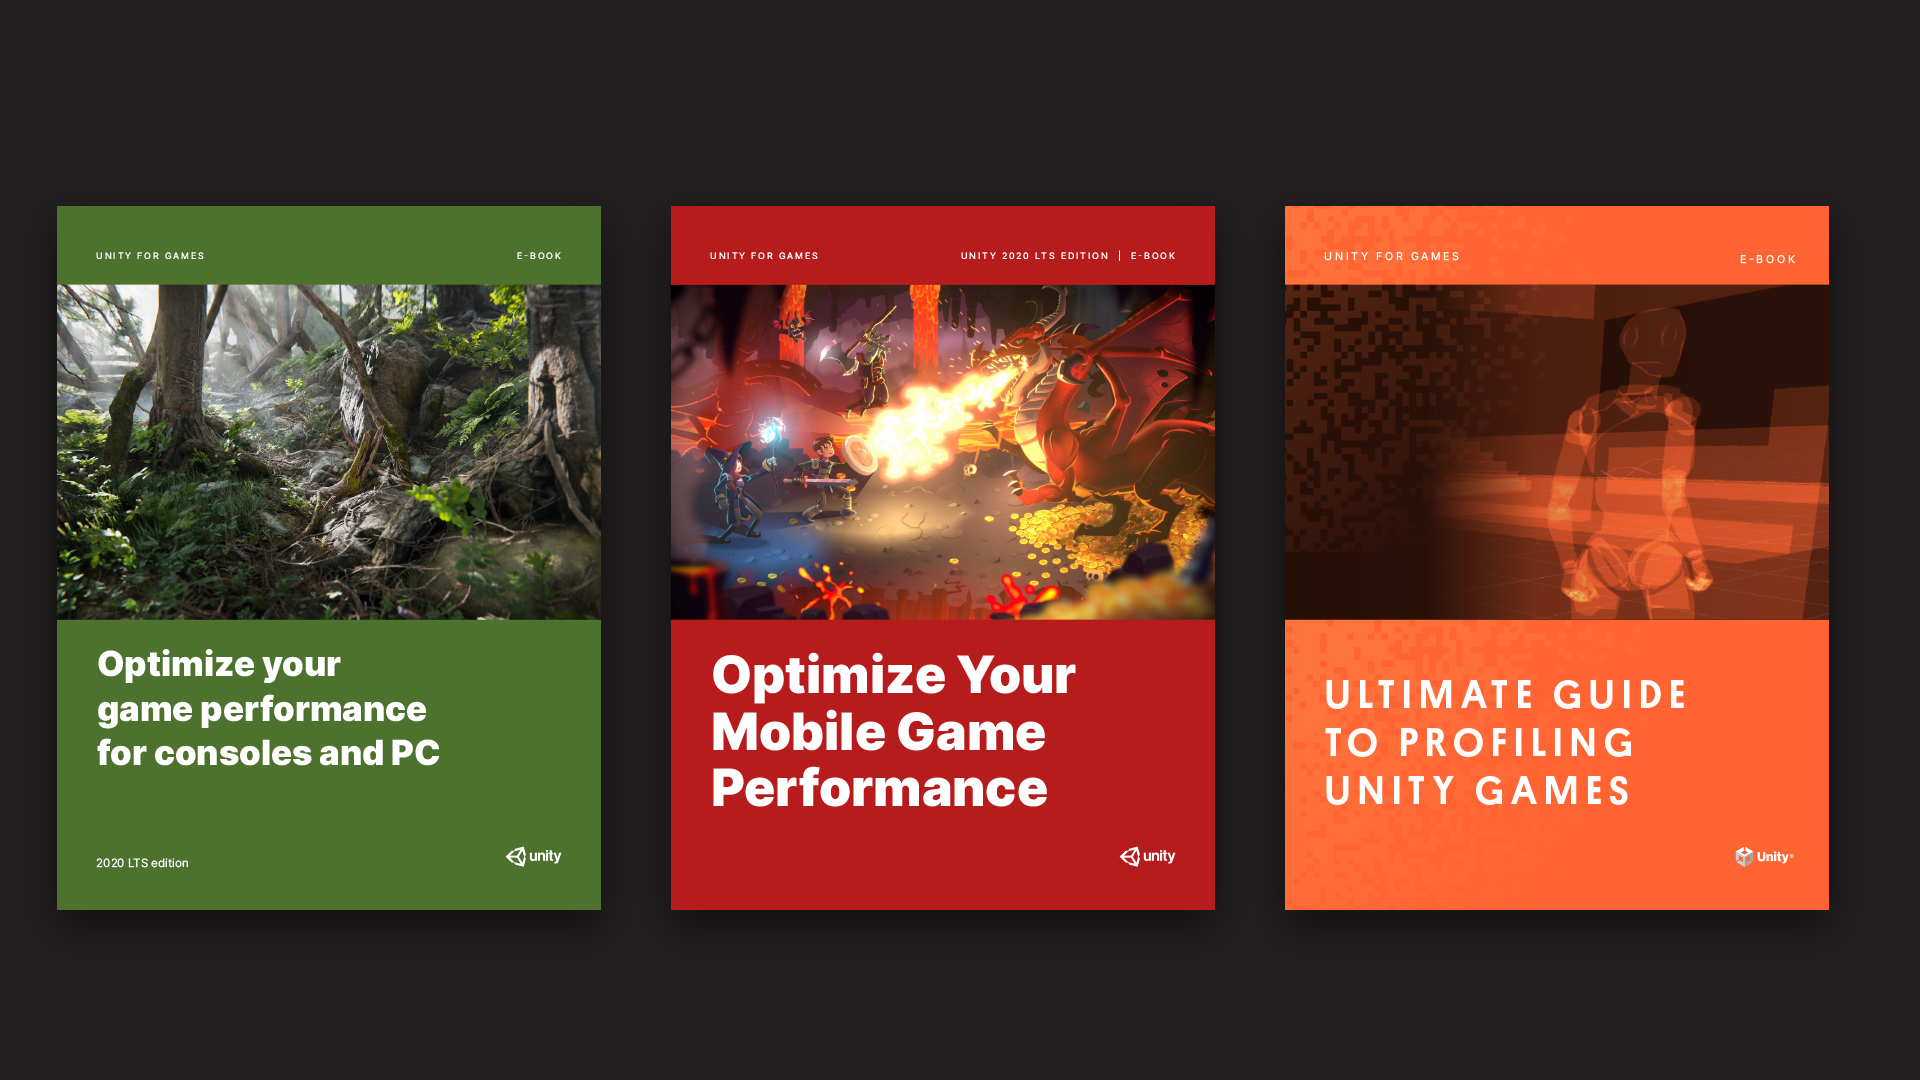 Cover images for three Unity e-books: Optimize your game performance for consoles and PC, Optimize your mobile game performance, and Ultimate guide to profiling in Unity games.